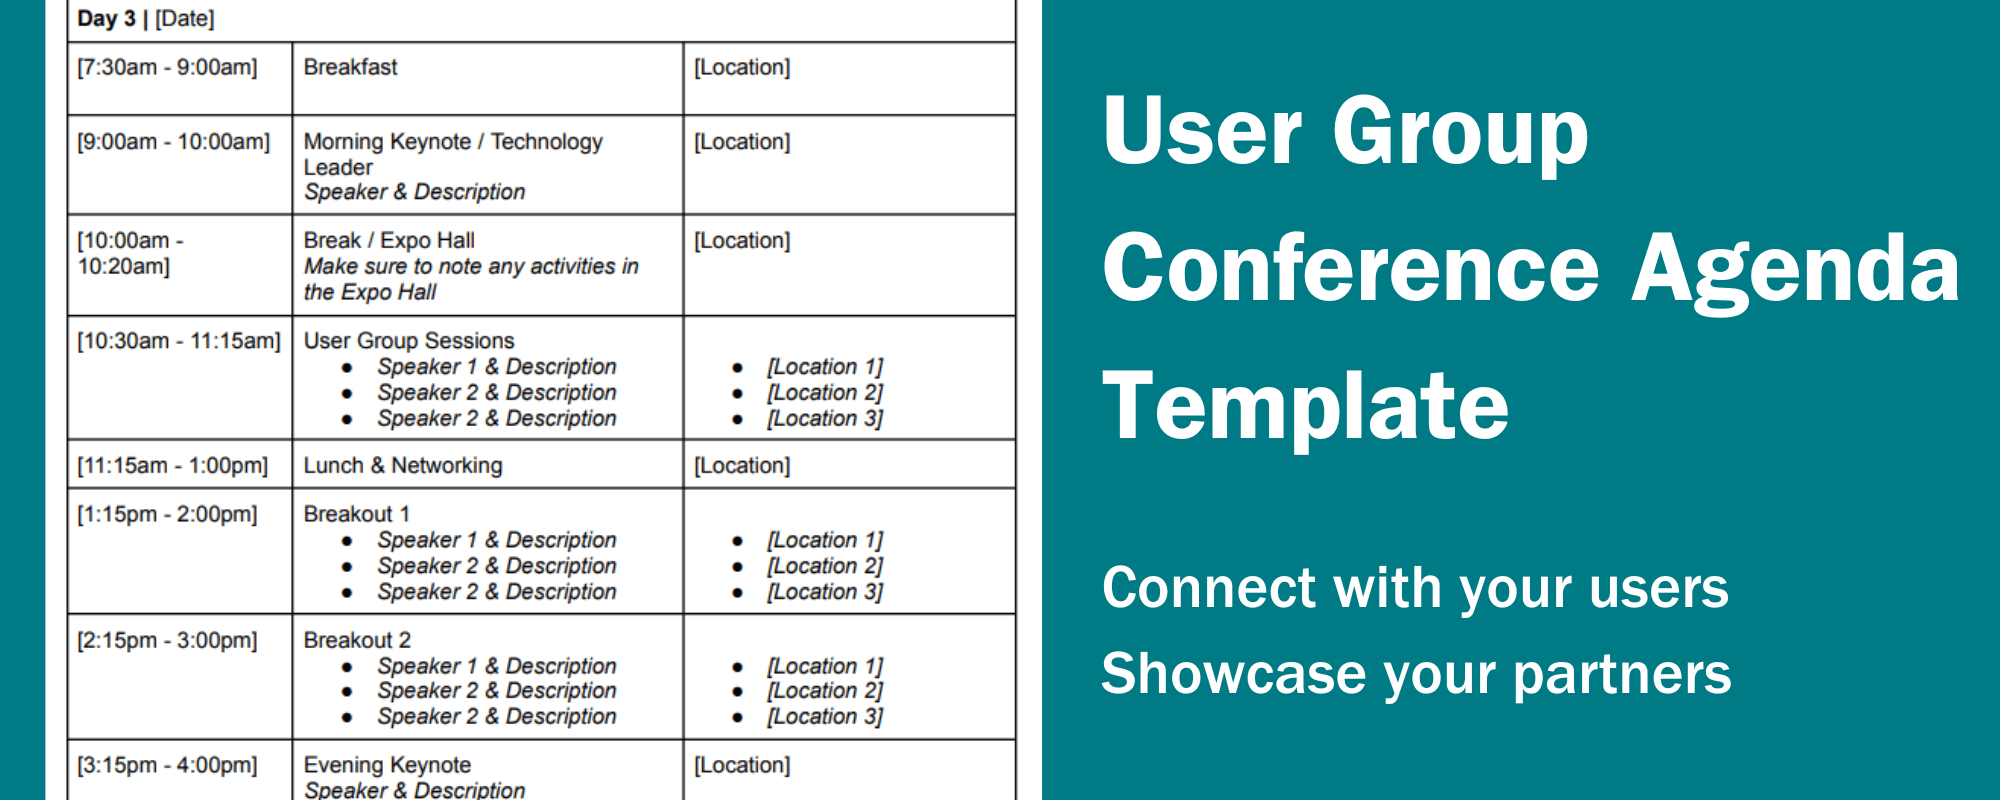 6 Conference Agenda Templates to Improve Engagement and Event Success